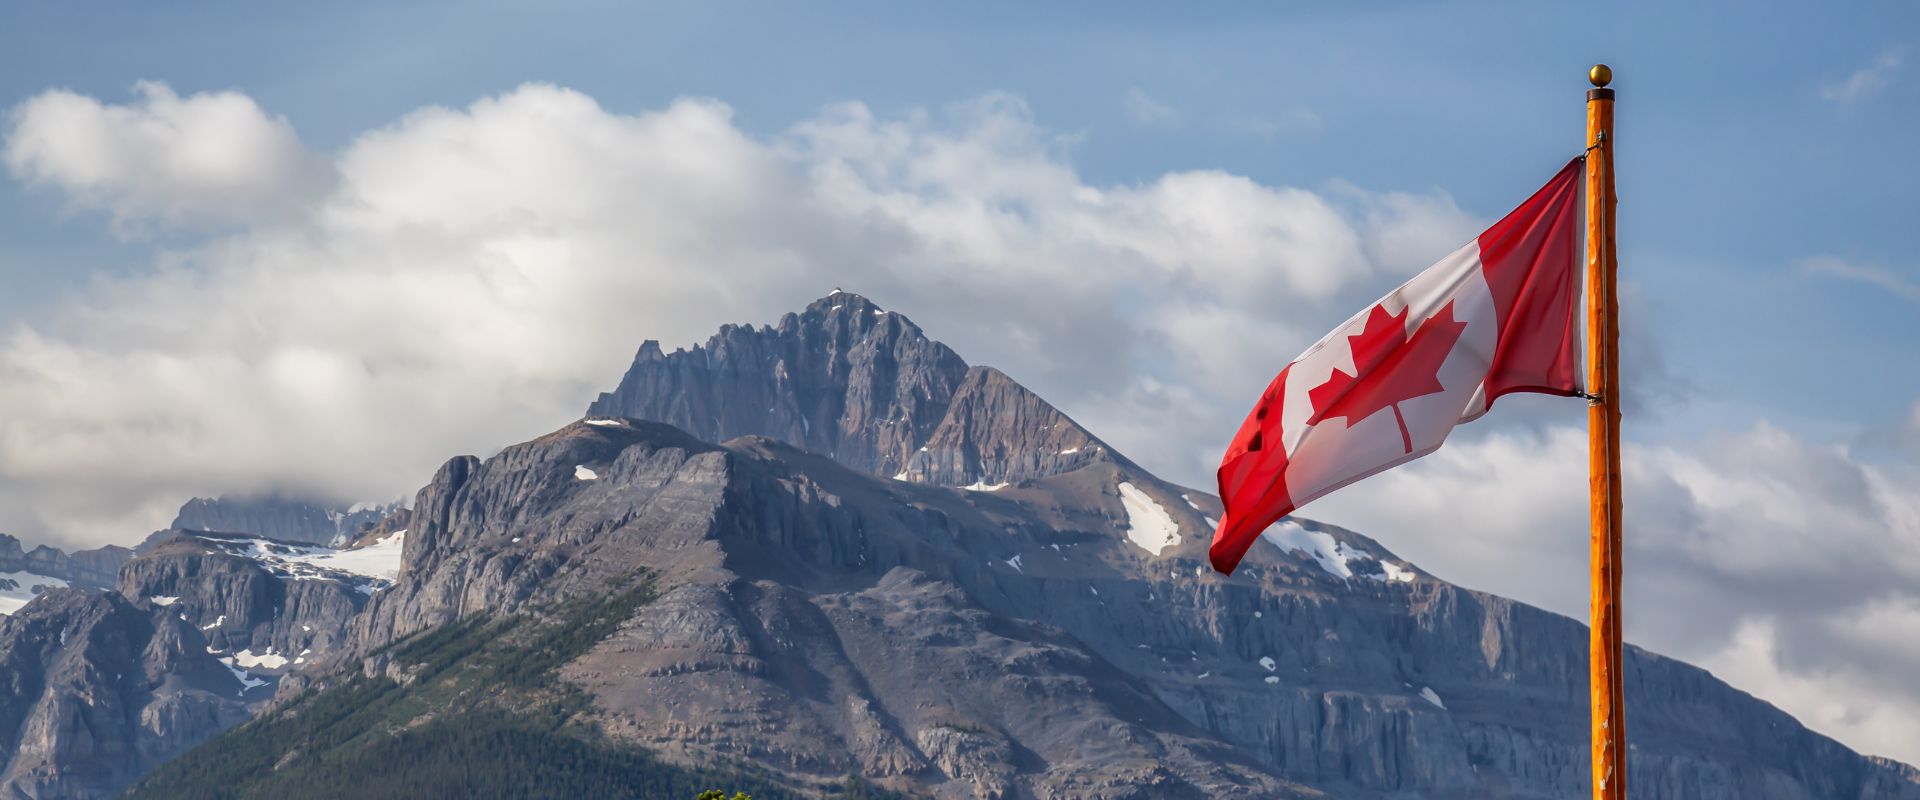 canadian flag in the mountains